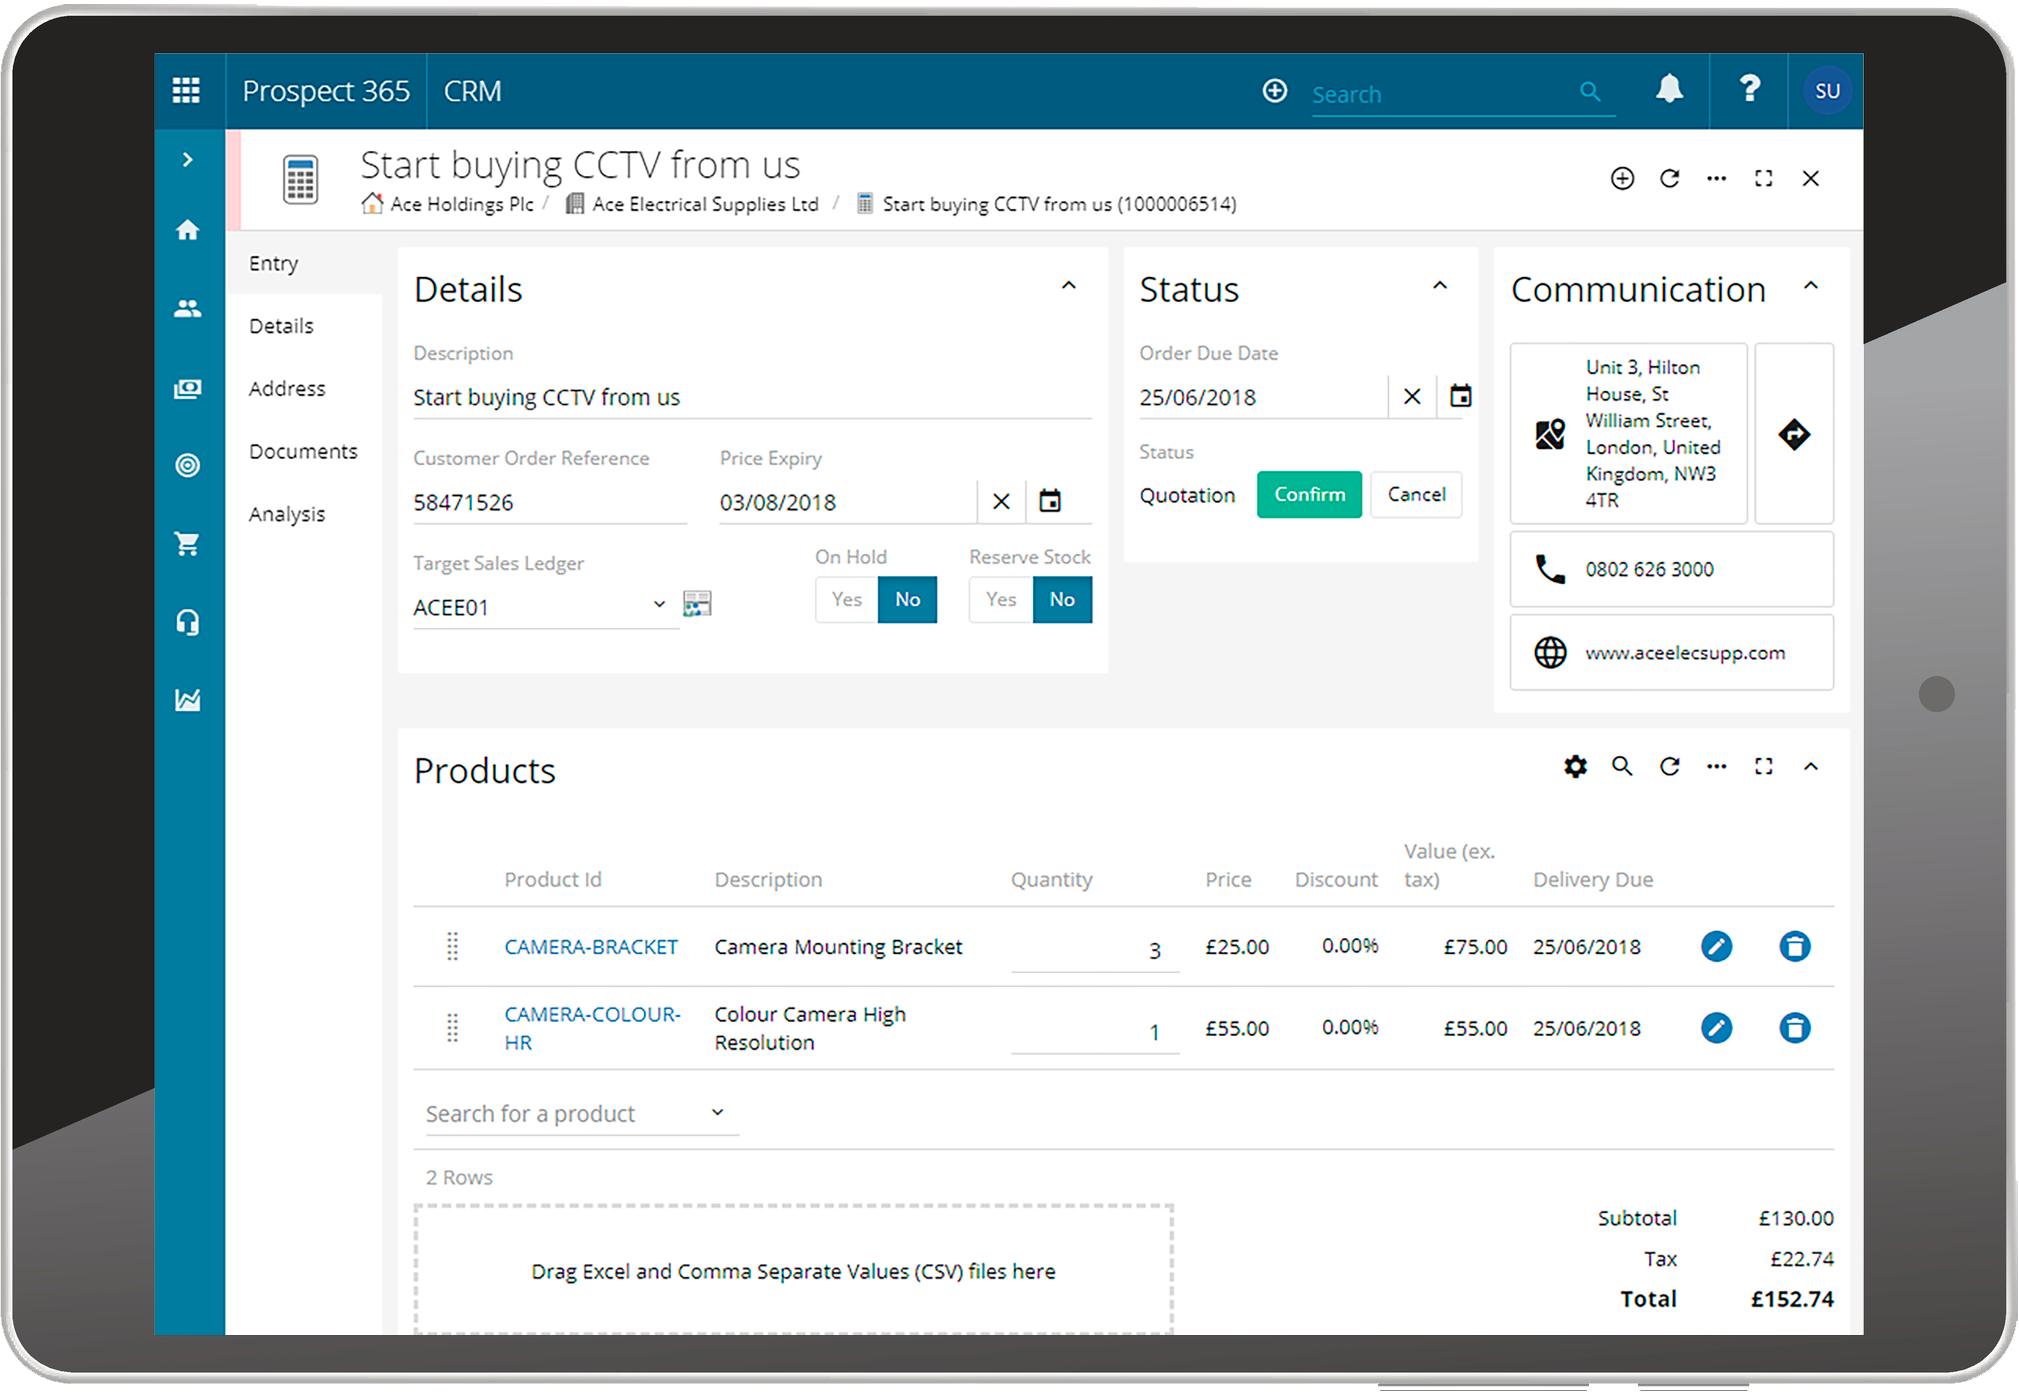 CRM Software with an intuitive UI